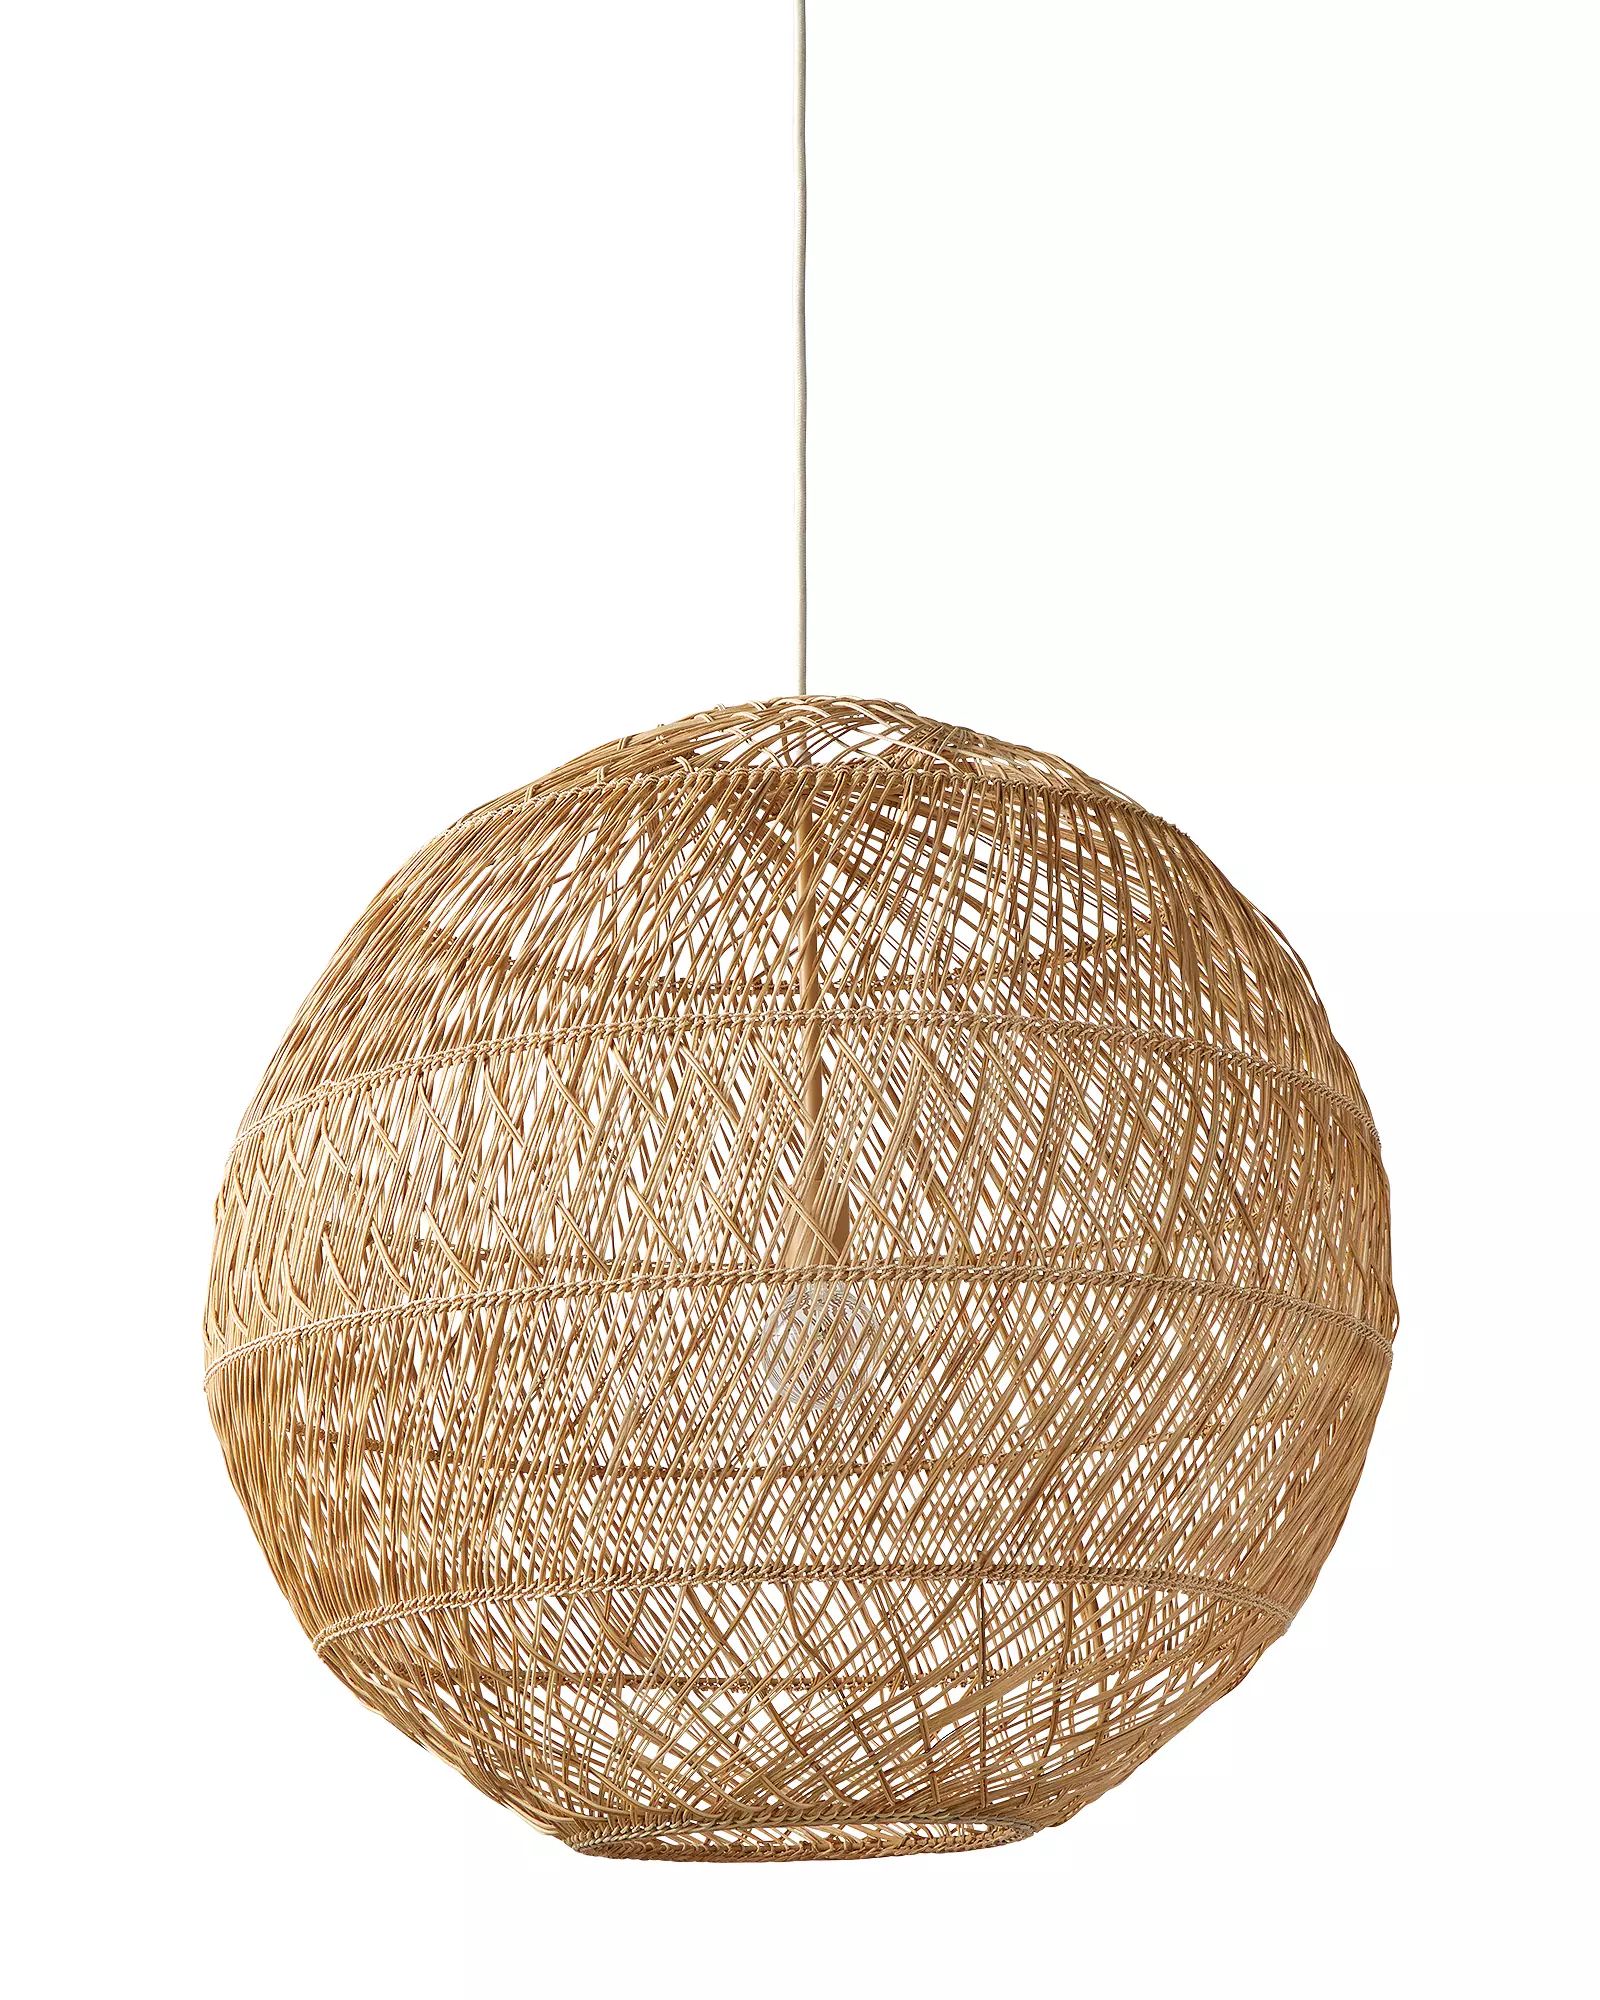 Headlands Rattan Round Pendant | Serena and Lily